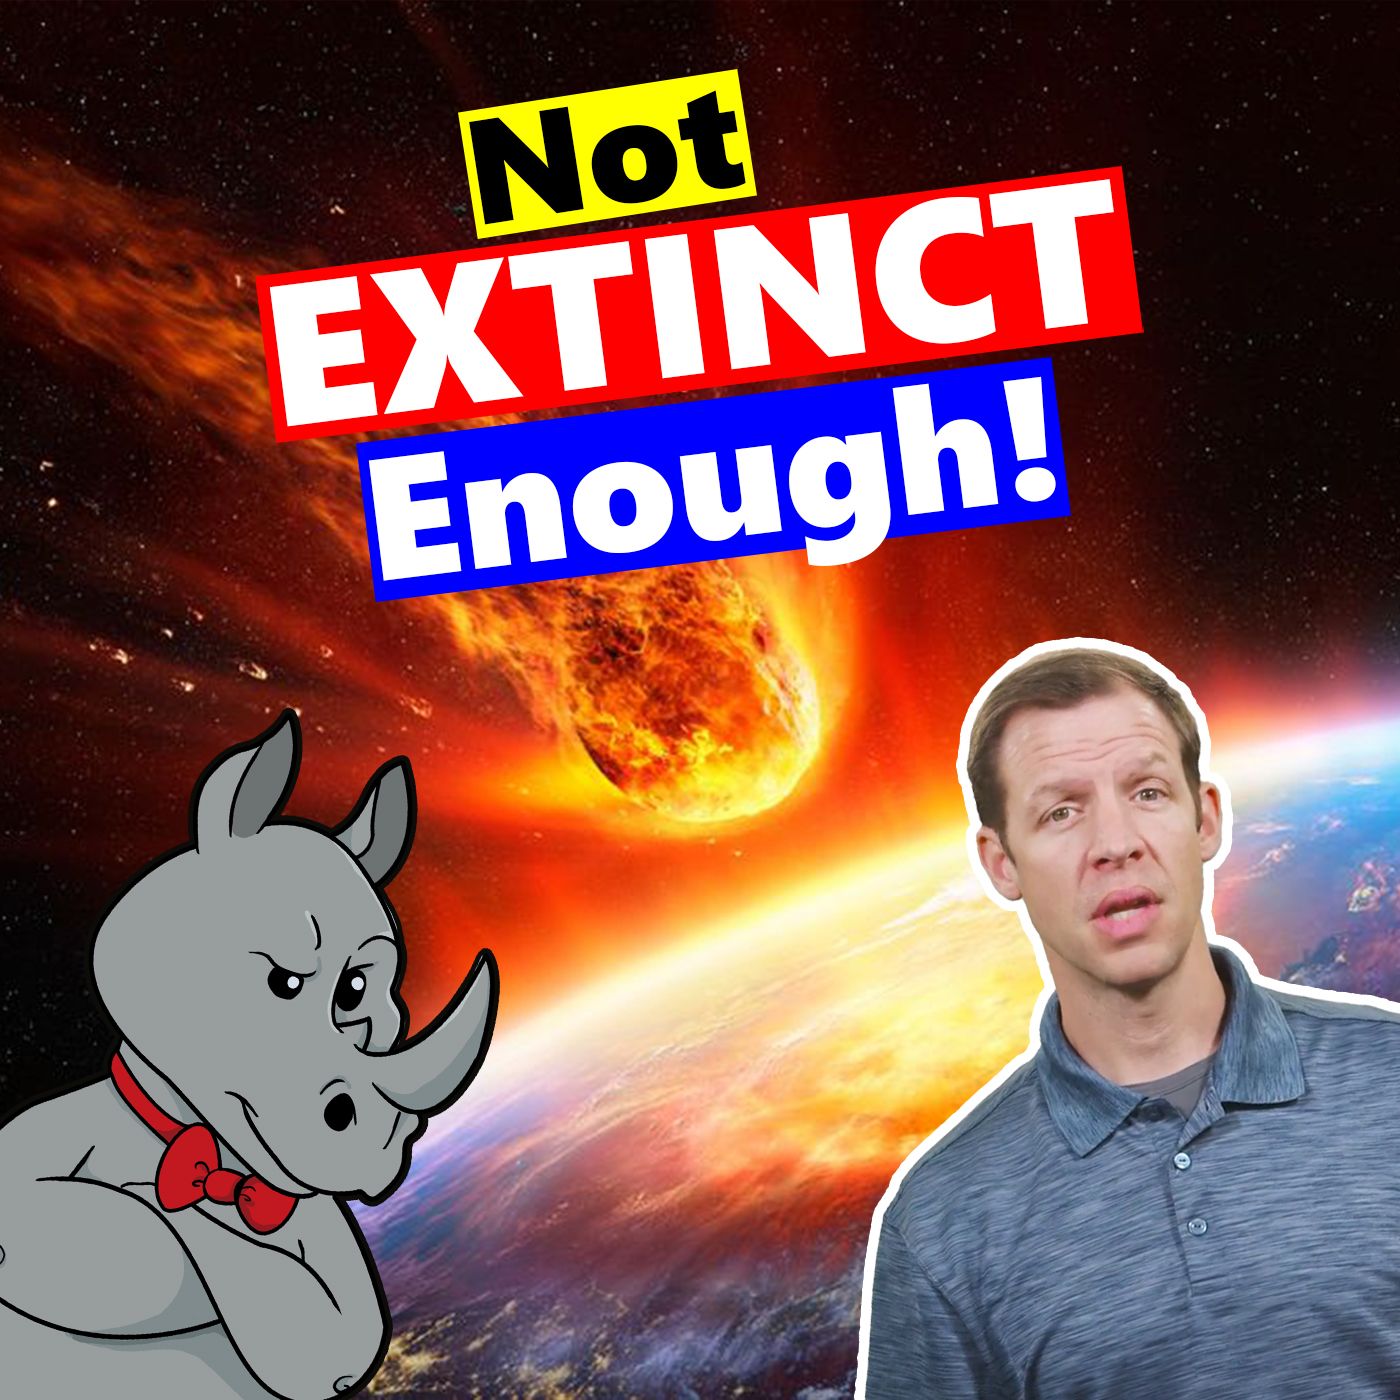 Extinction Wasn't Total, So It Never Happened!